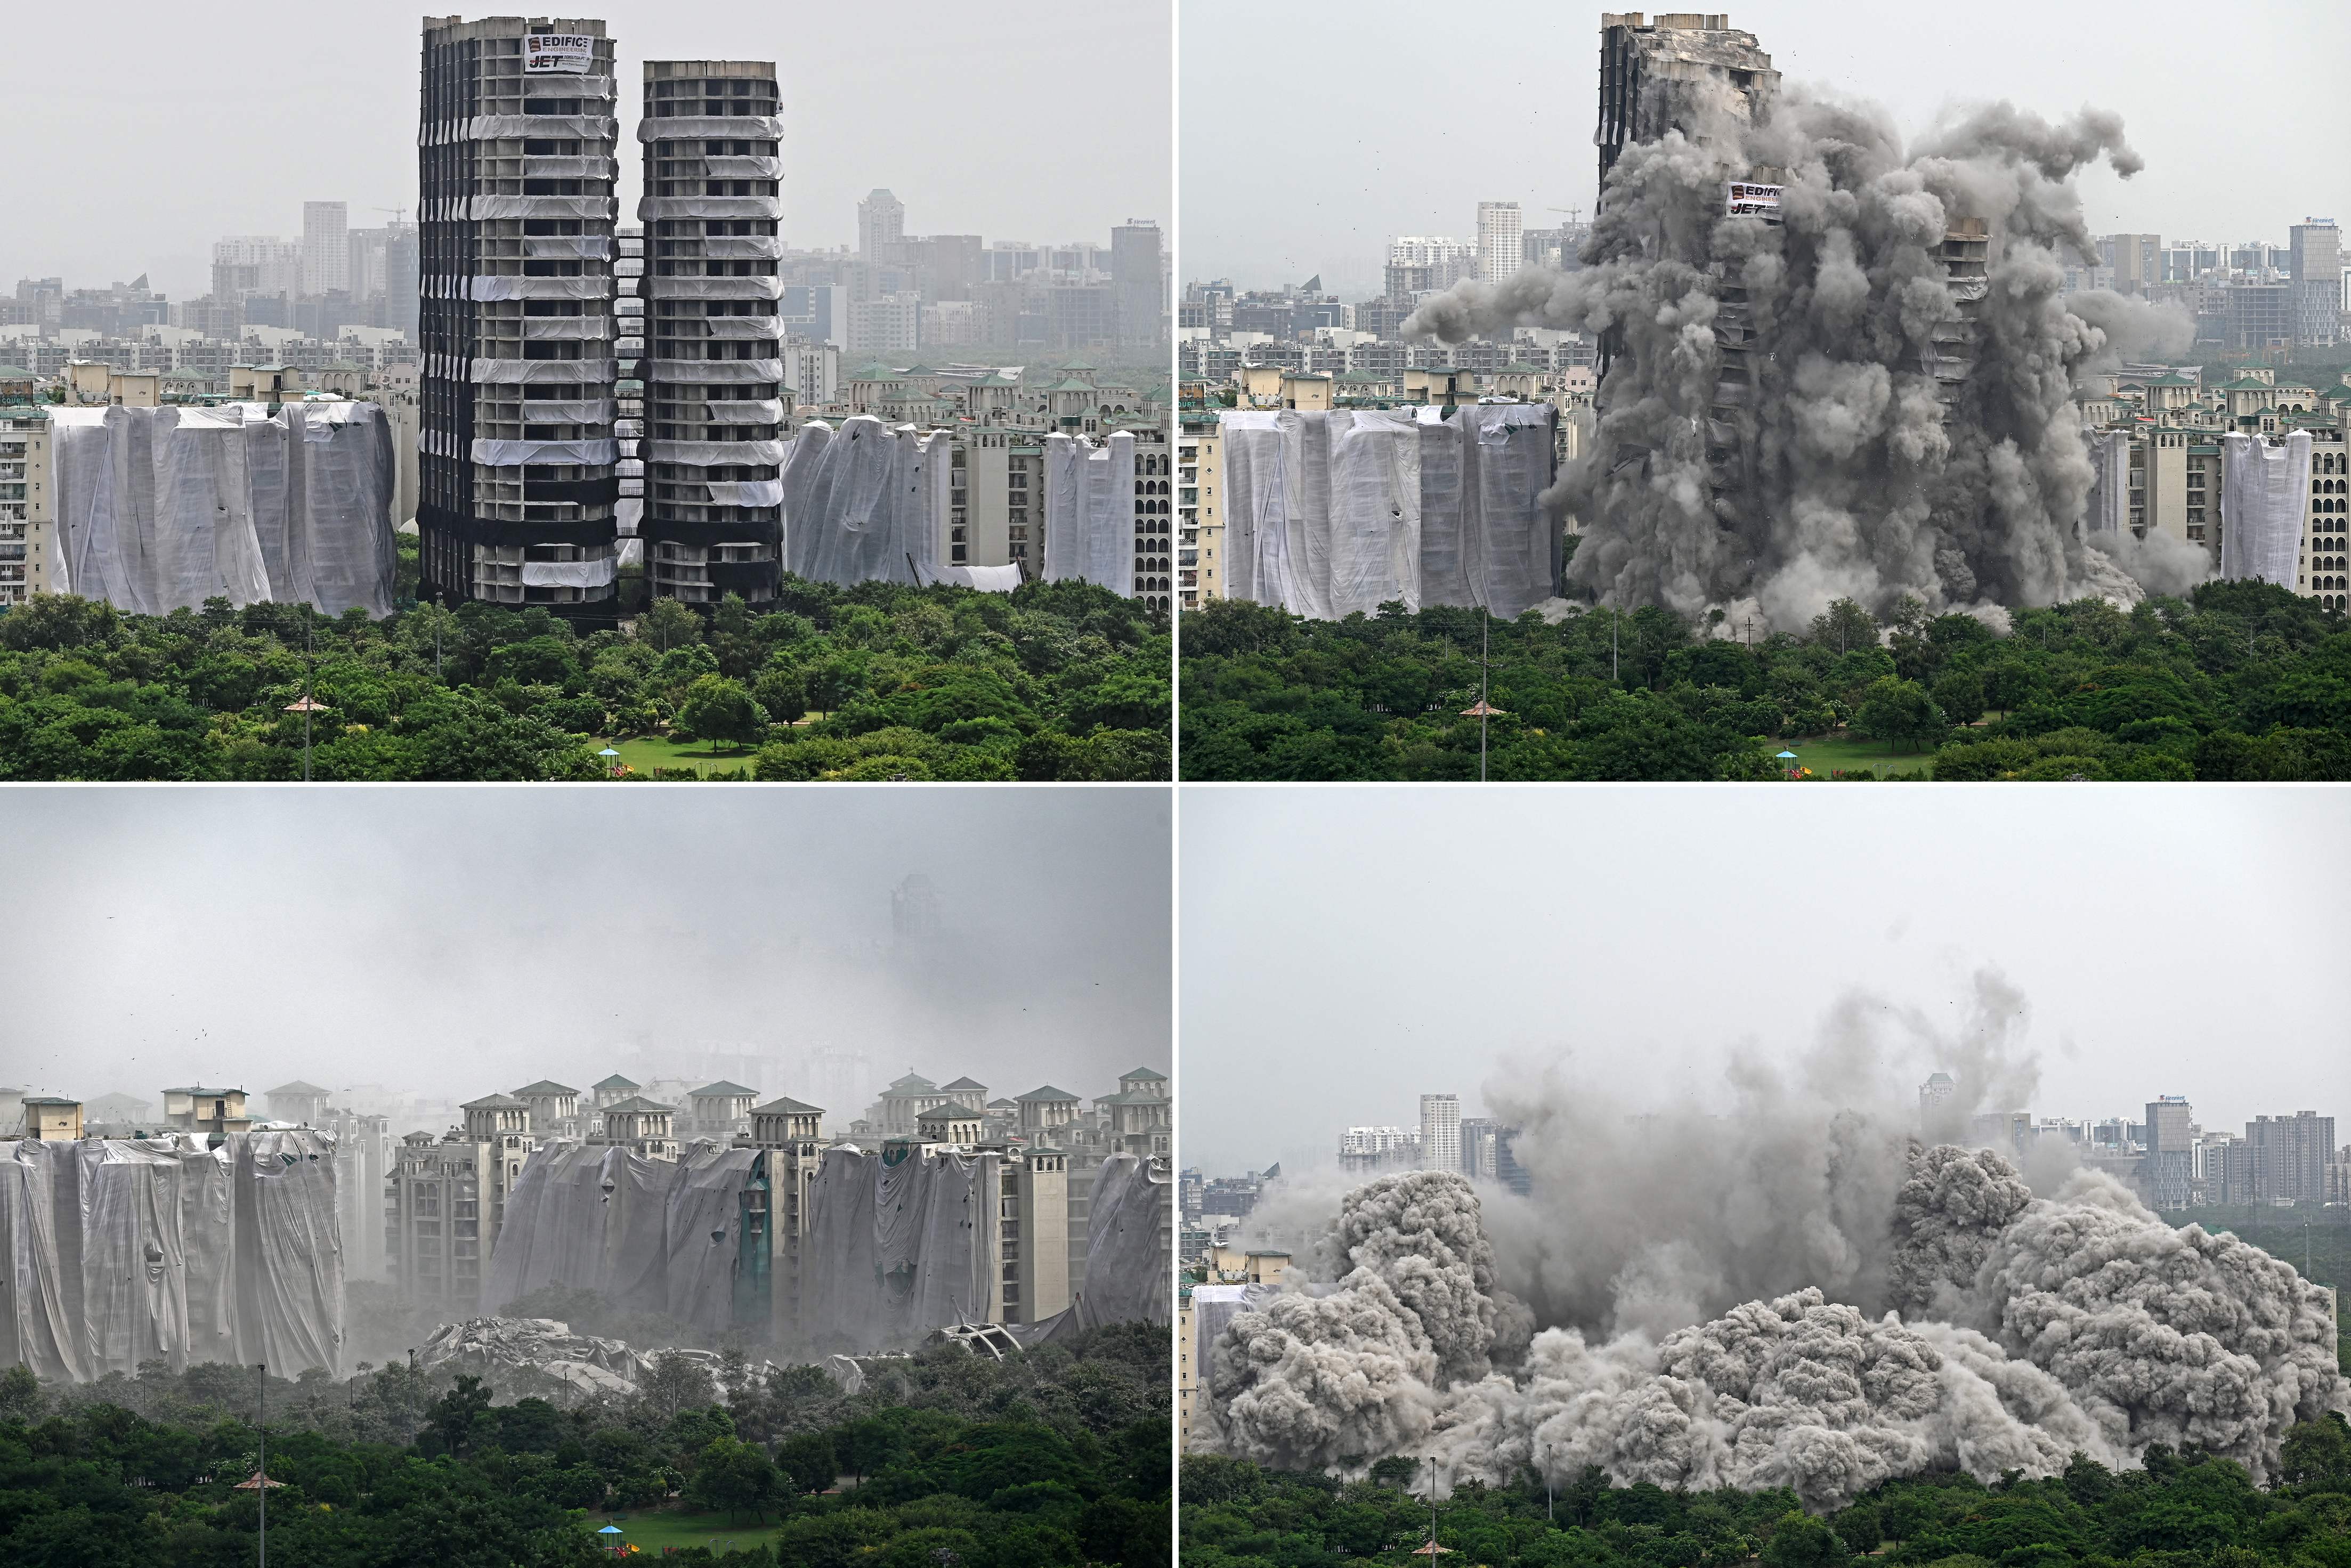 Combination of pictures show a controlled implosion demolishing the 100-metre-high Supertech residential ‘twin towers’ in Noida